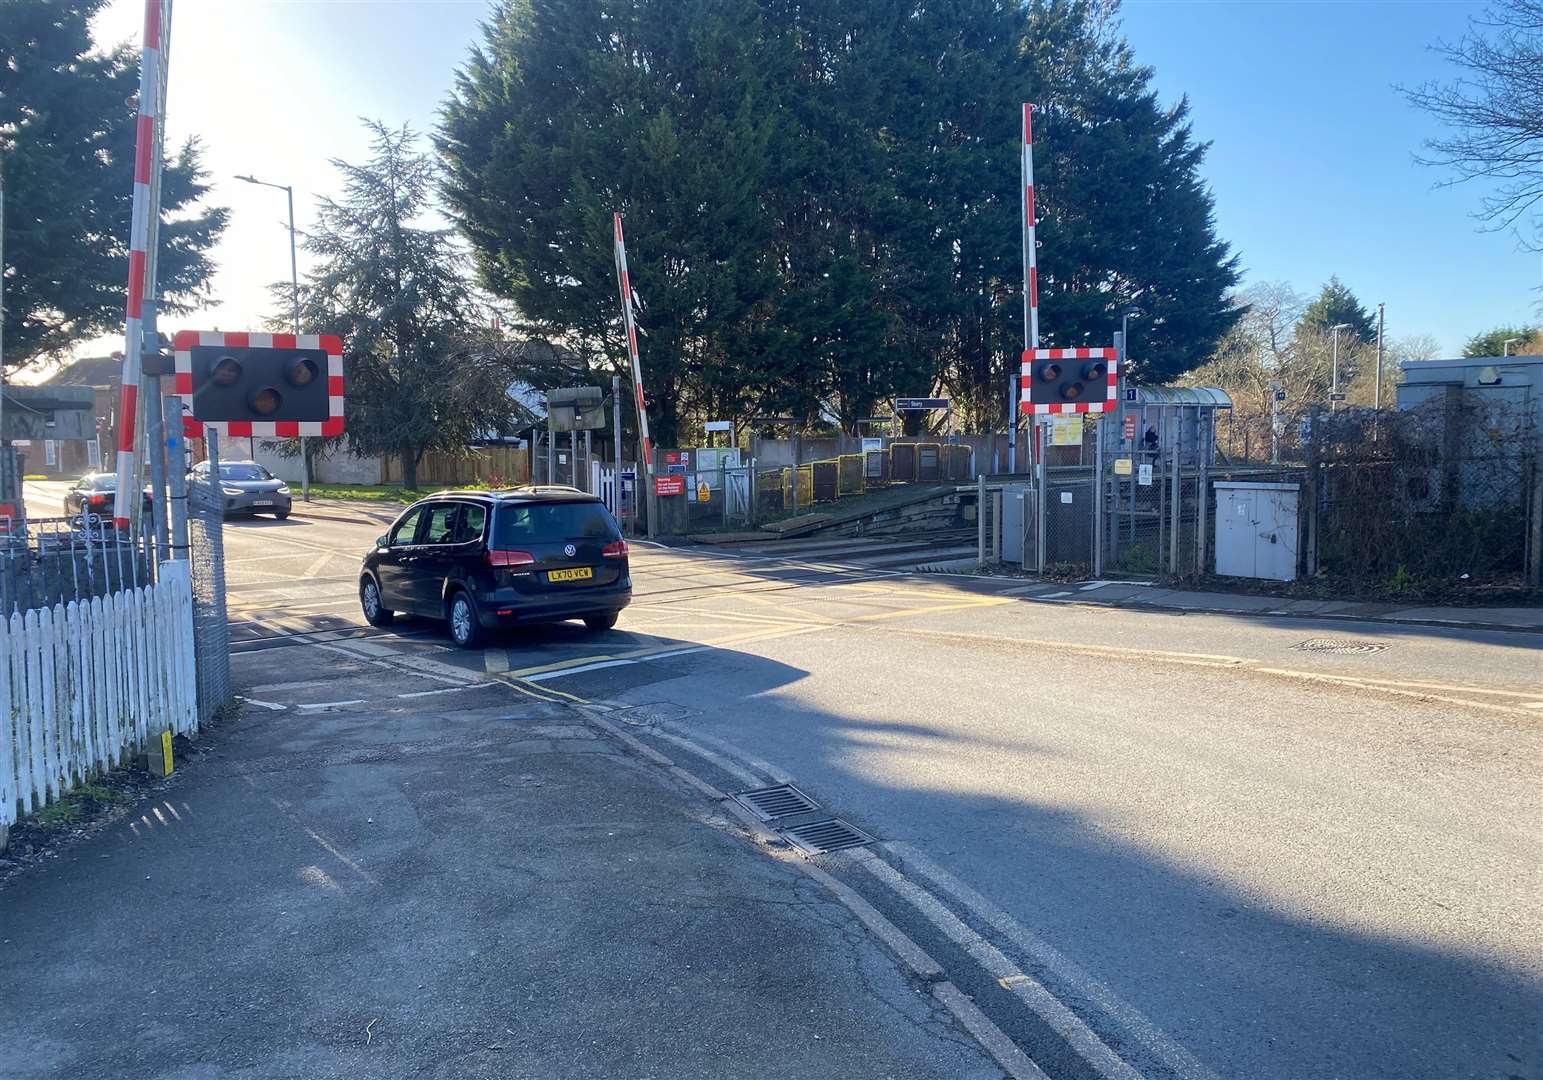 Sturry crossing handles more than 20,000 vehicles a day